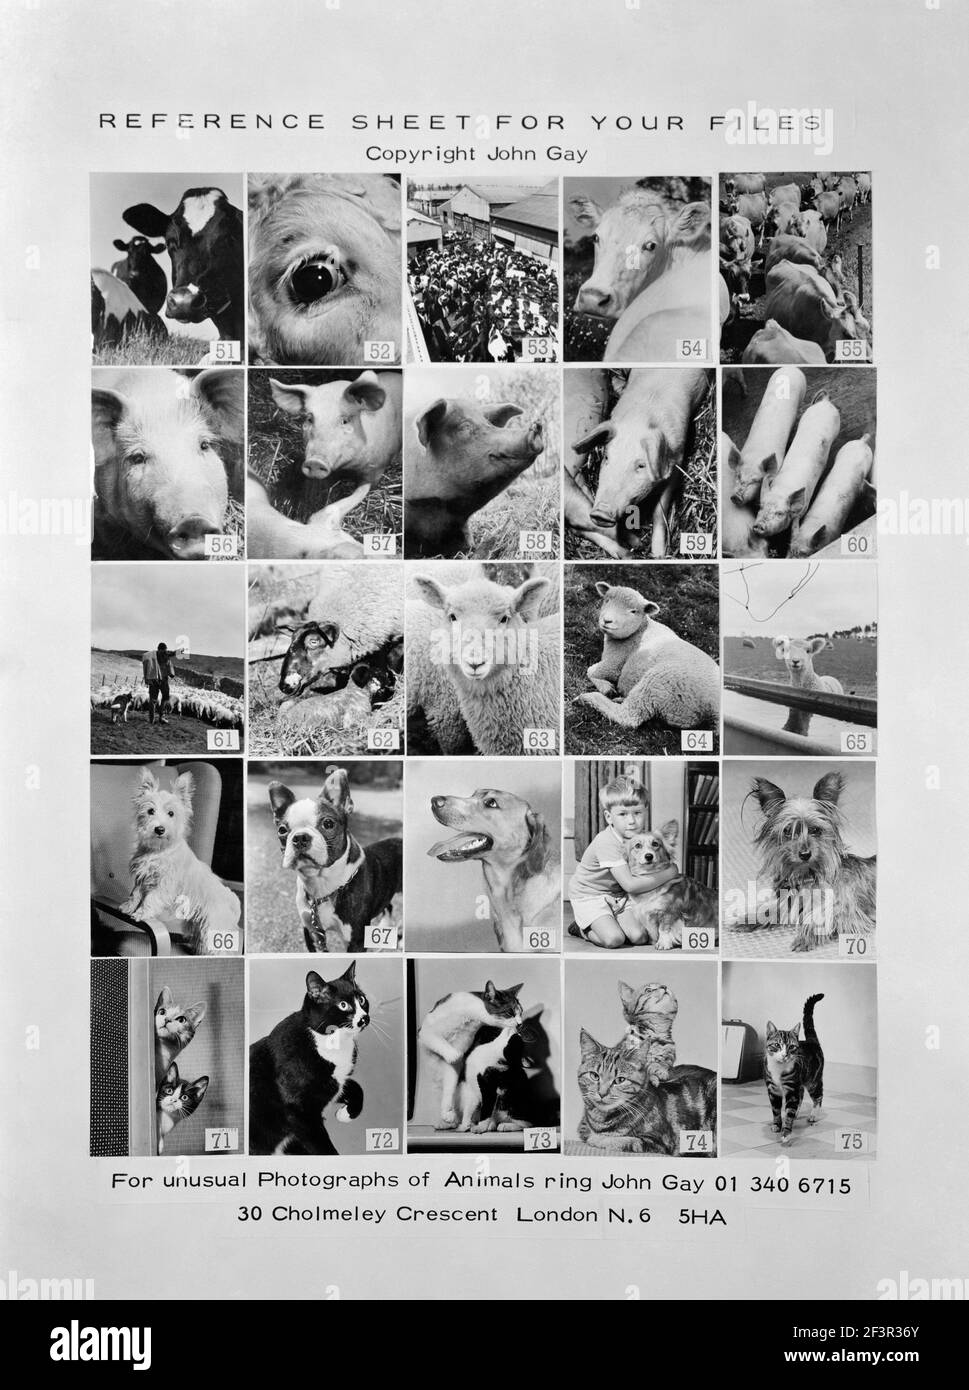 Photograph of promotional reference sheet of unusual photographs of animals taken by John Gay. November 1970. cow, cattle, pig, lamb Stock Photo